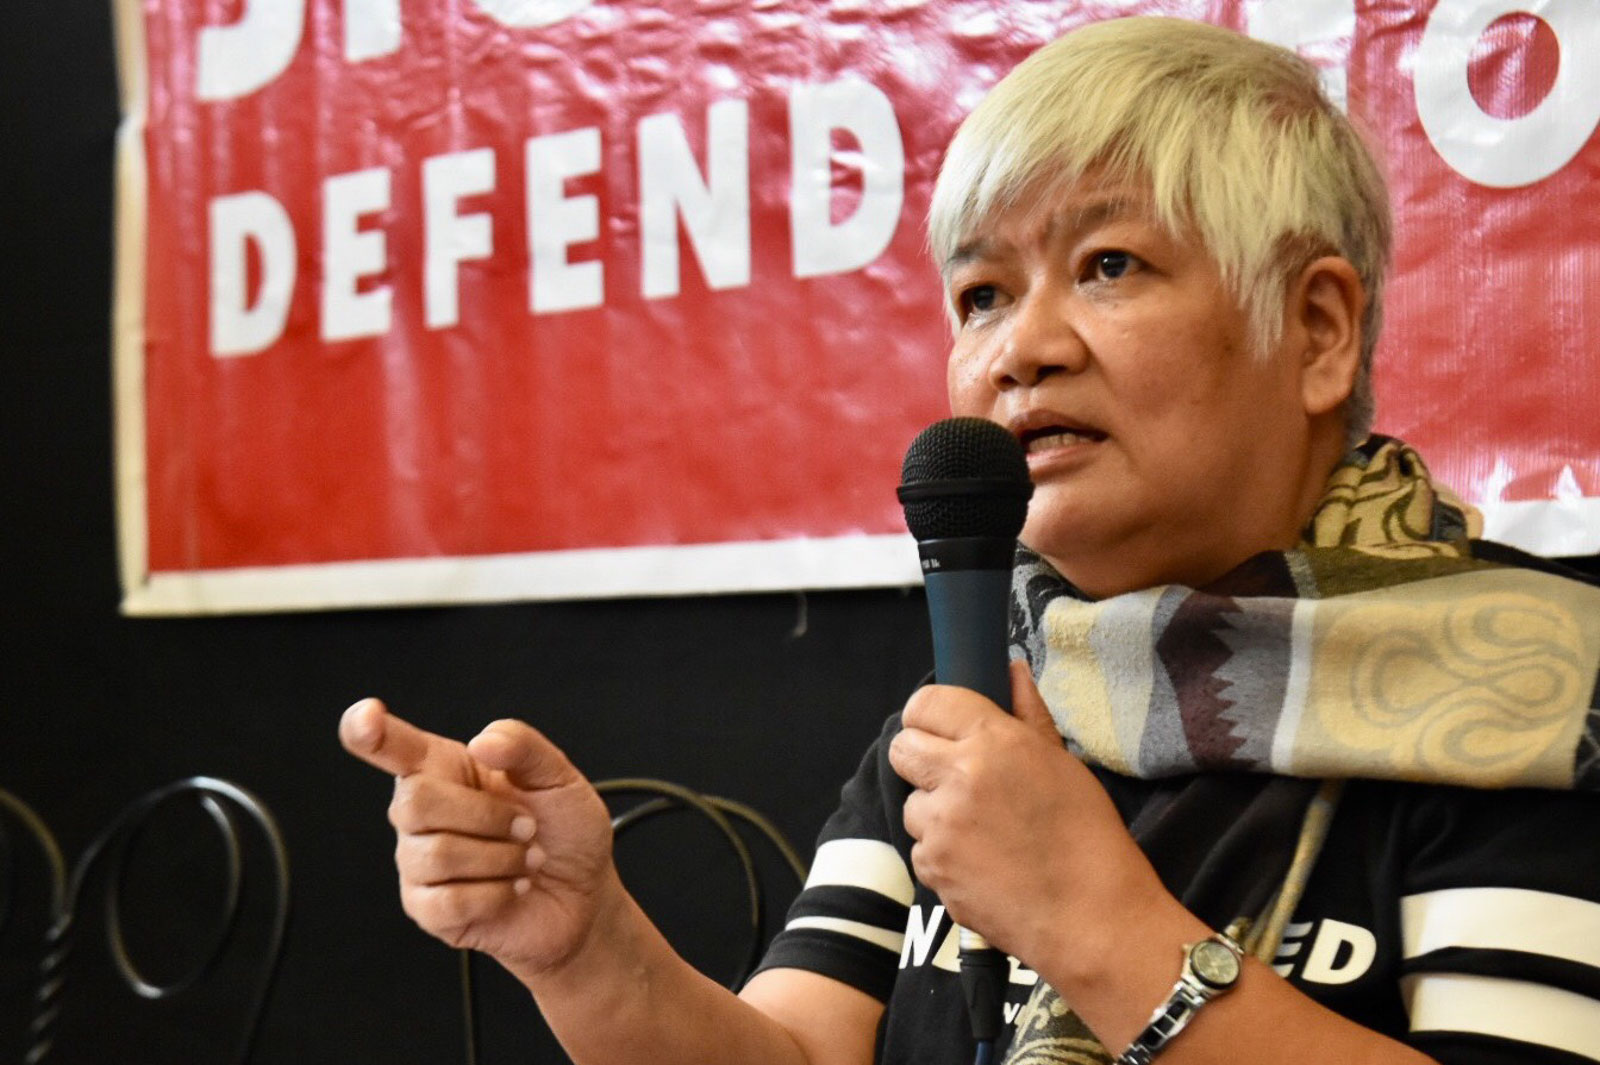 INCOMMUNICADO FOR 8 HOURS. Margarita Valle recalls her experience in a press briefing on June 12, 2019, in Quezon City. Photo by Angie de Silva/Rappler 